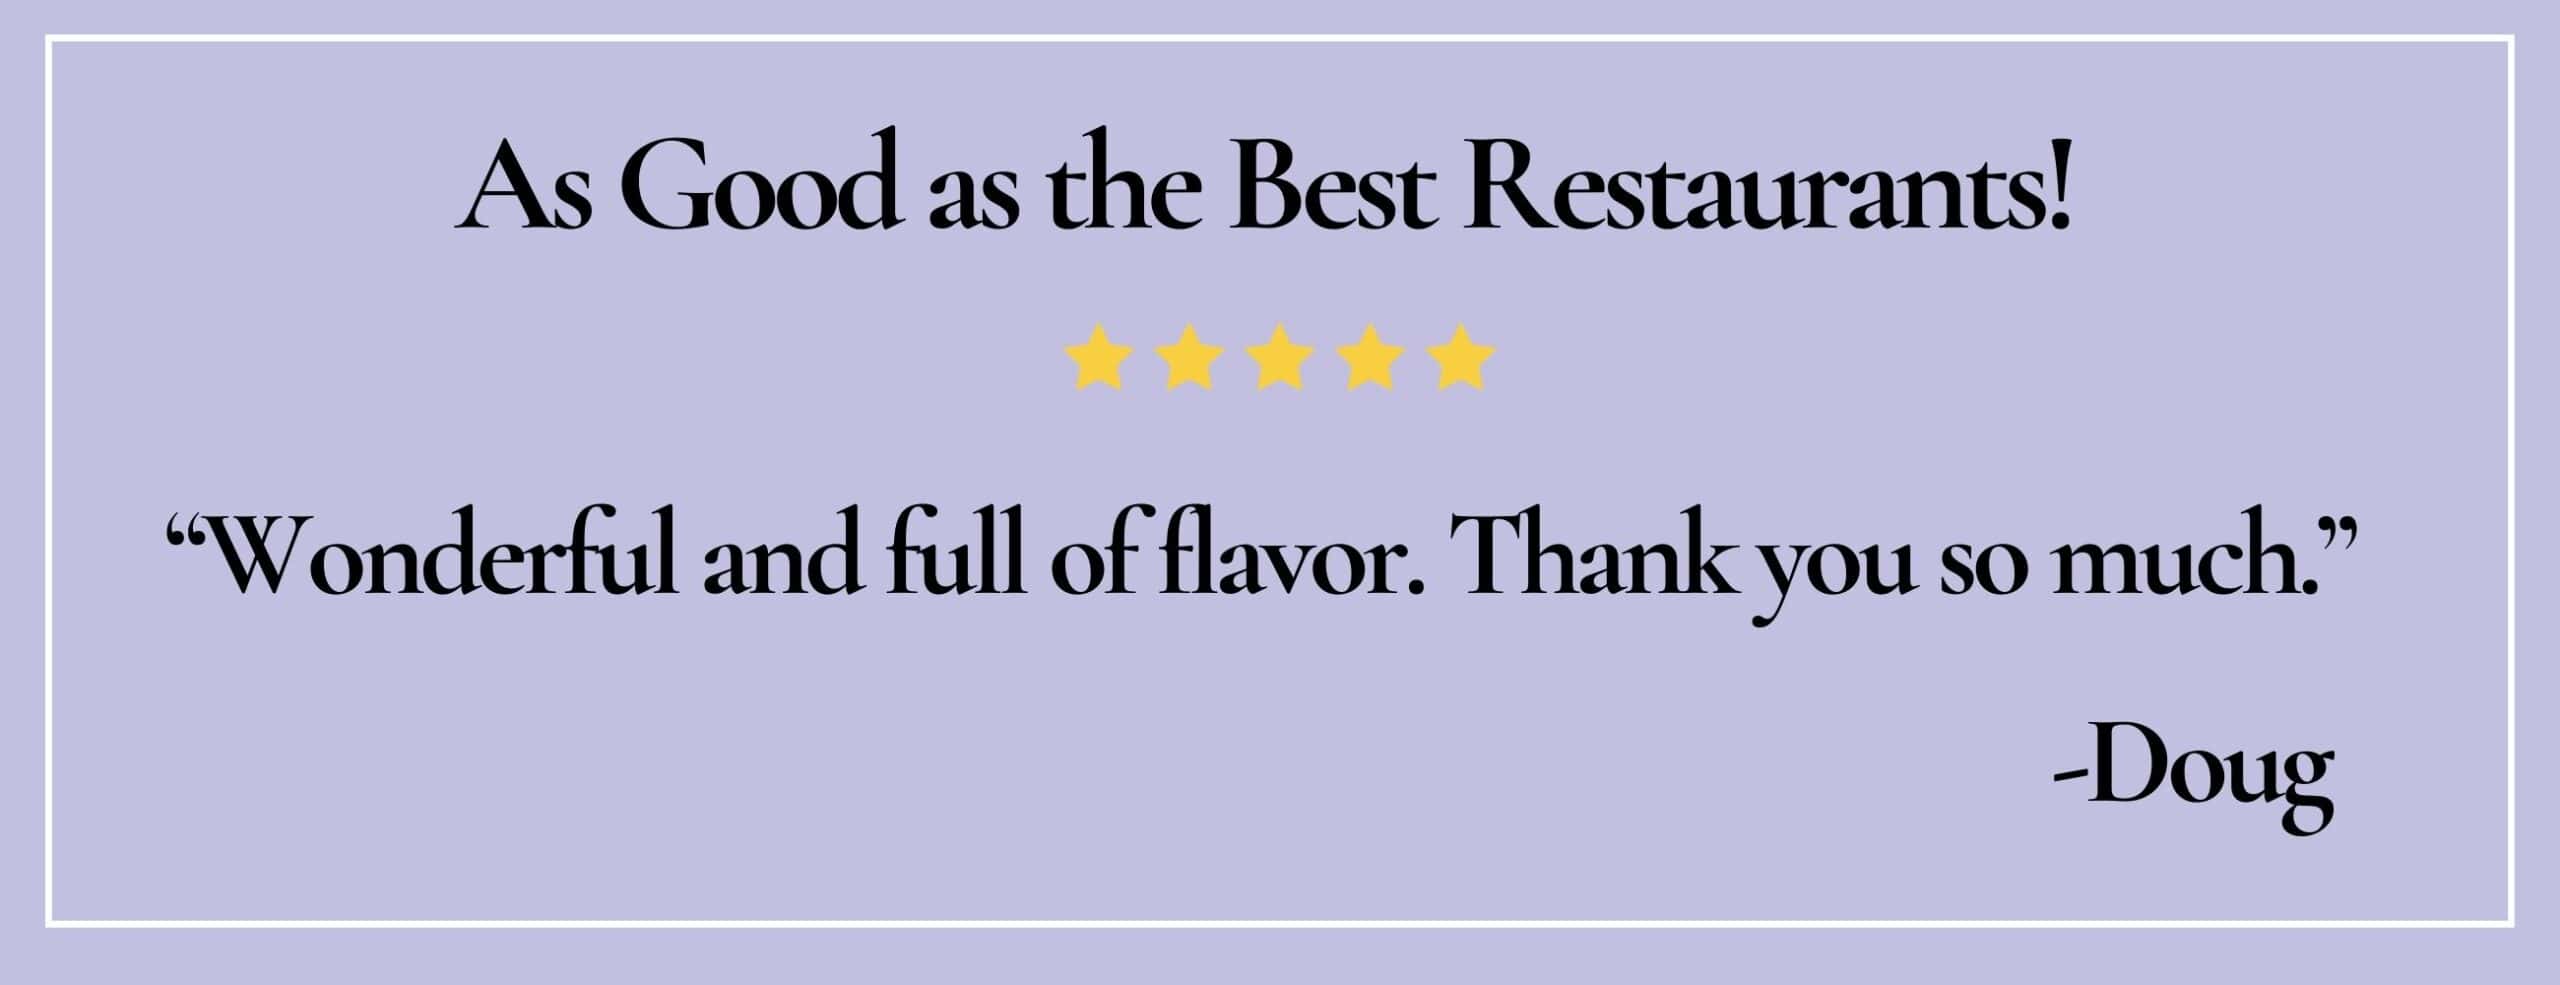 text box with quote: As good as the best restaurants! "Wonderful and full of flavor. Thank you so much."-Doug